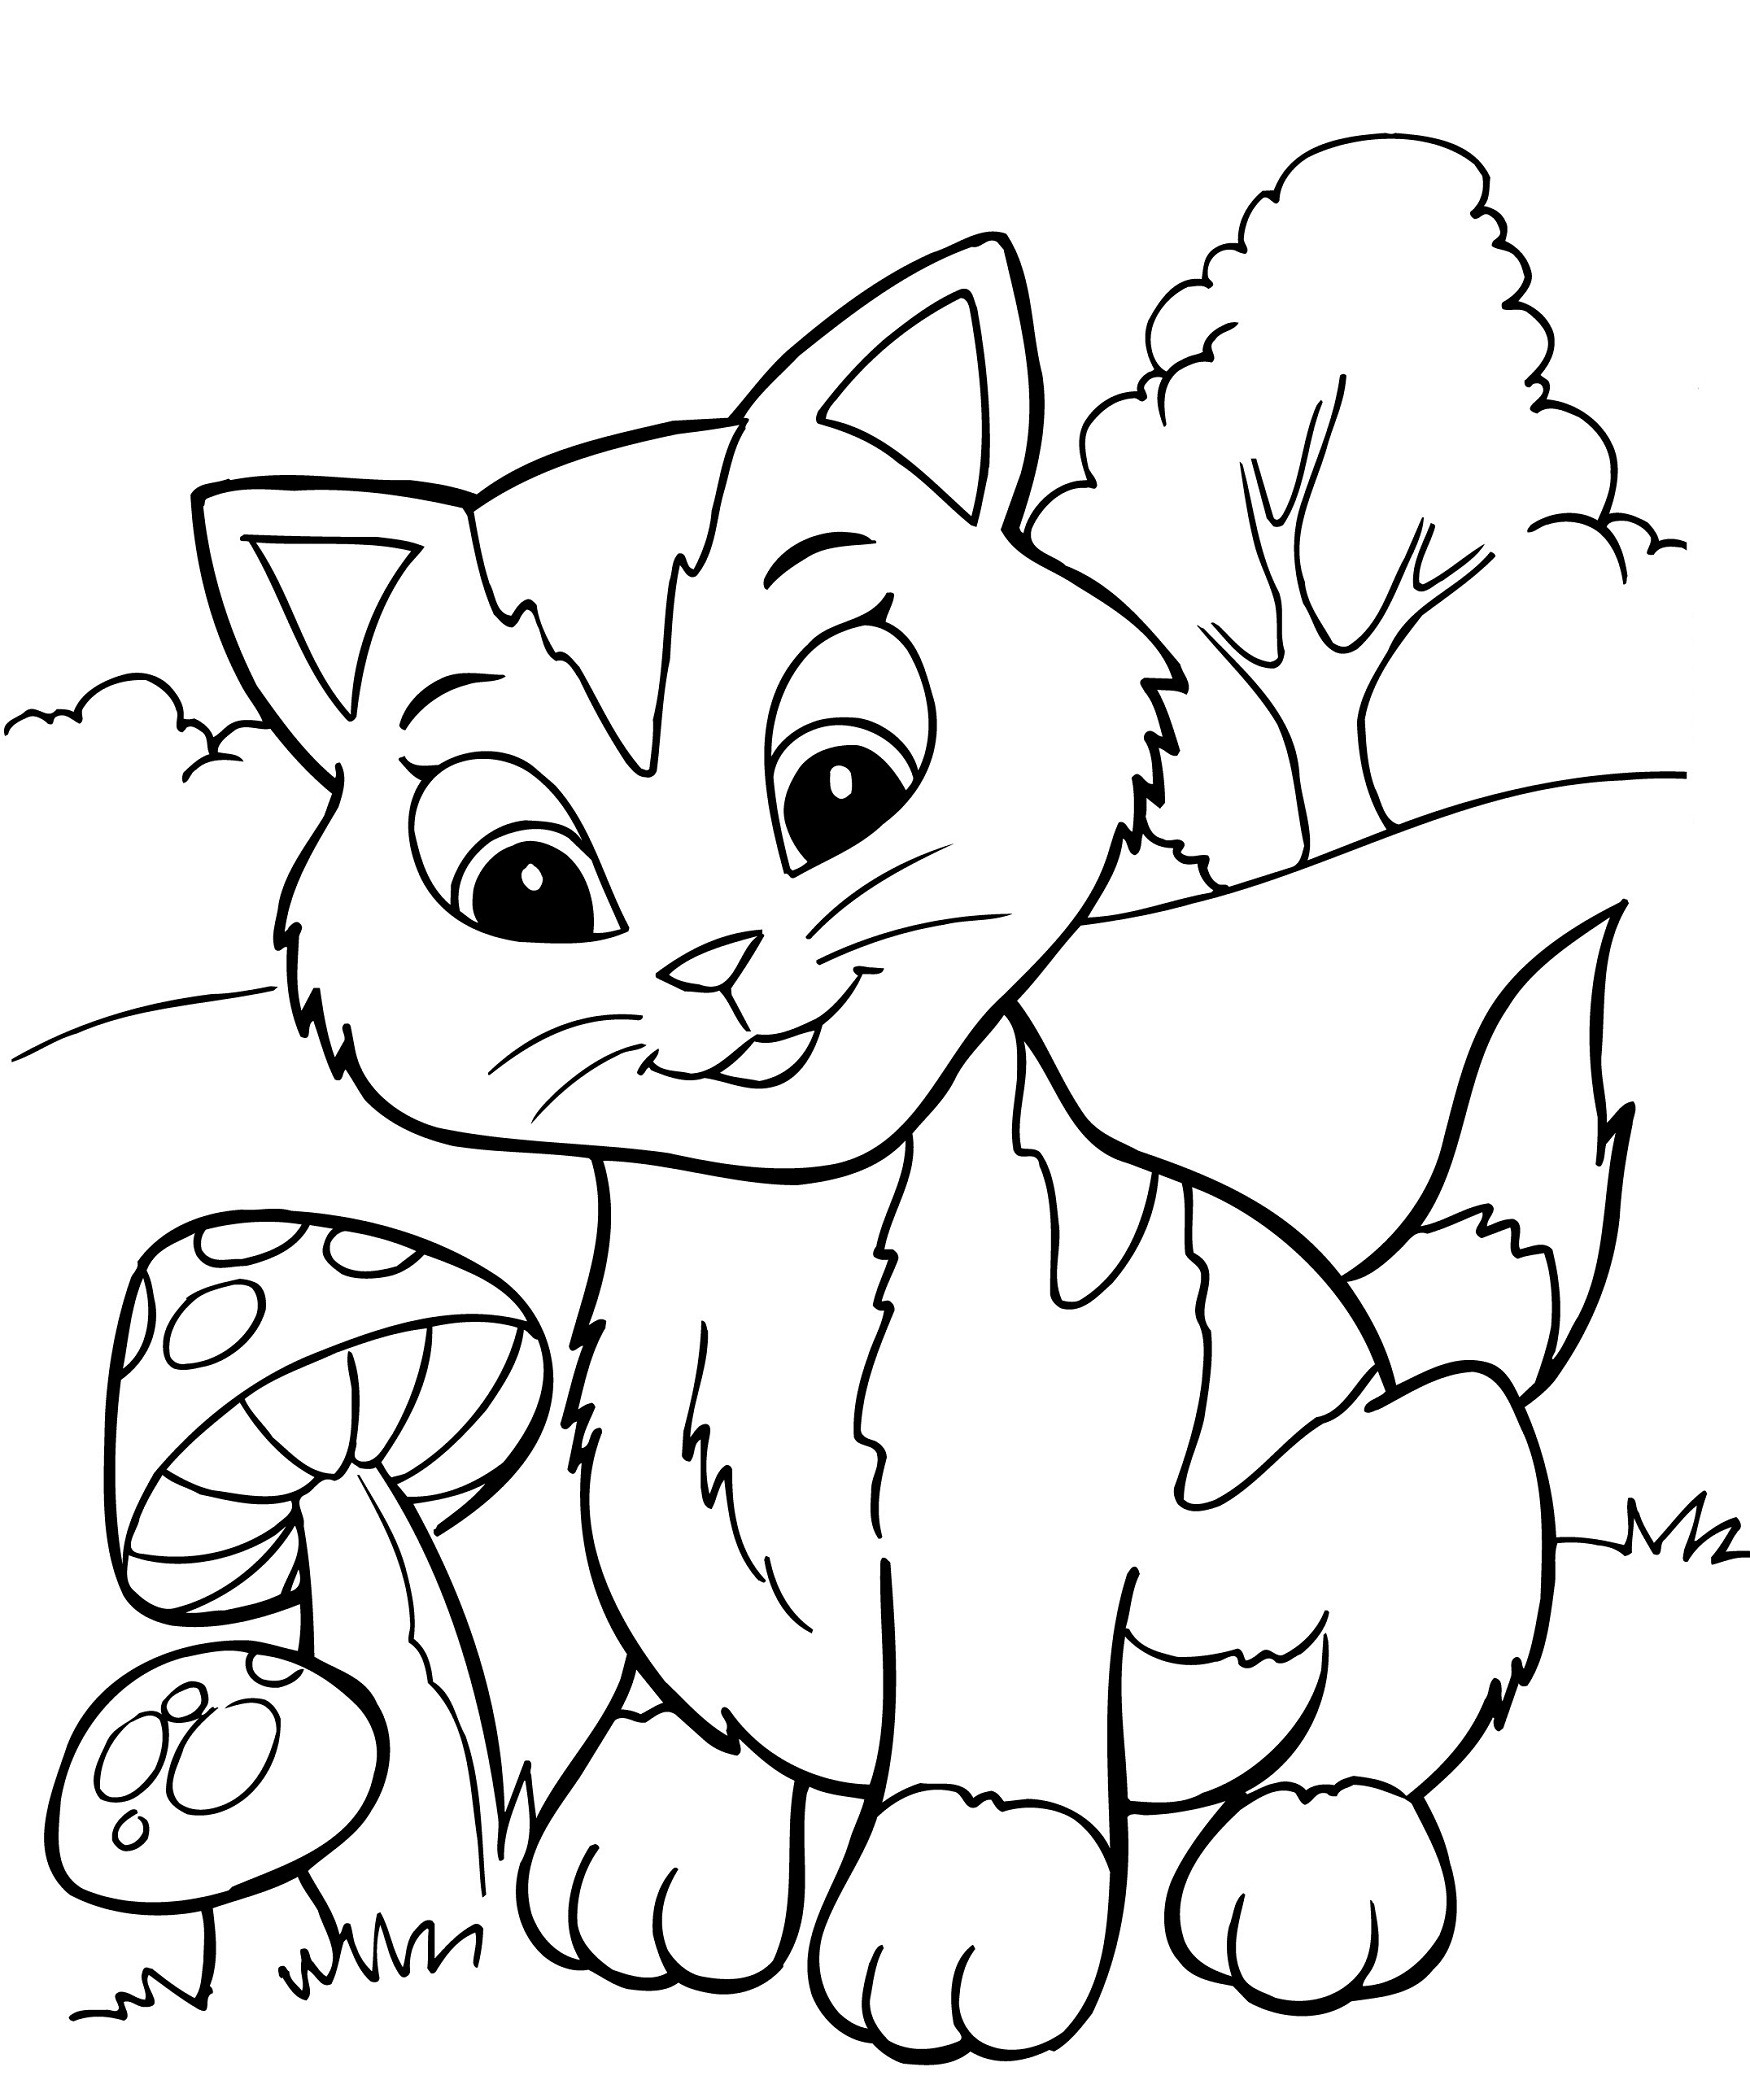 Coloring Pages For Kids Printable
 Free Printable Kitten Coloring Pages For Kids Best